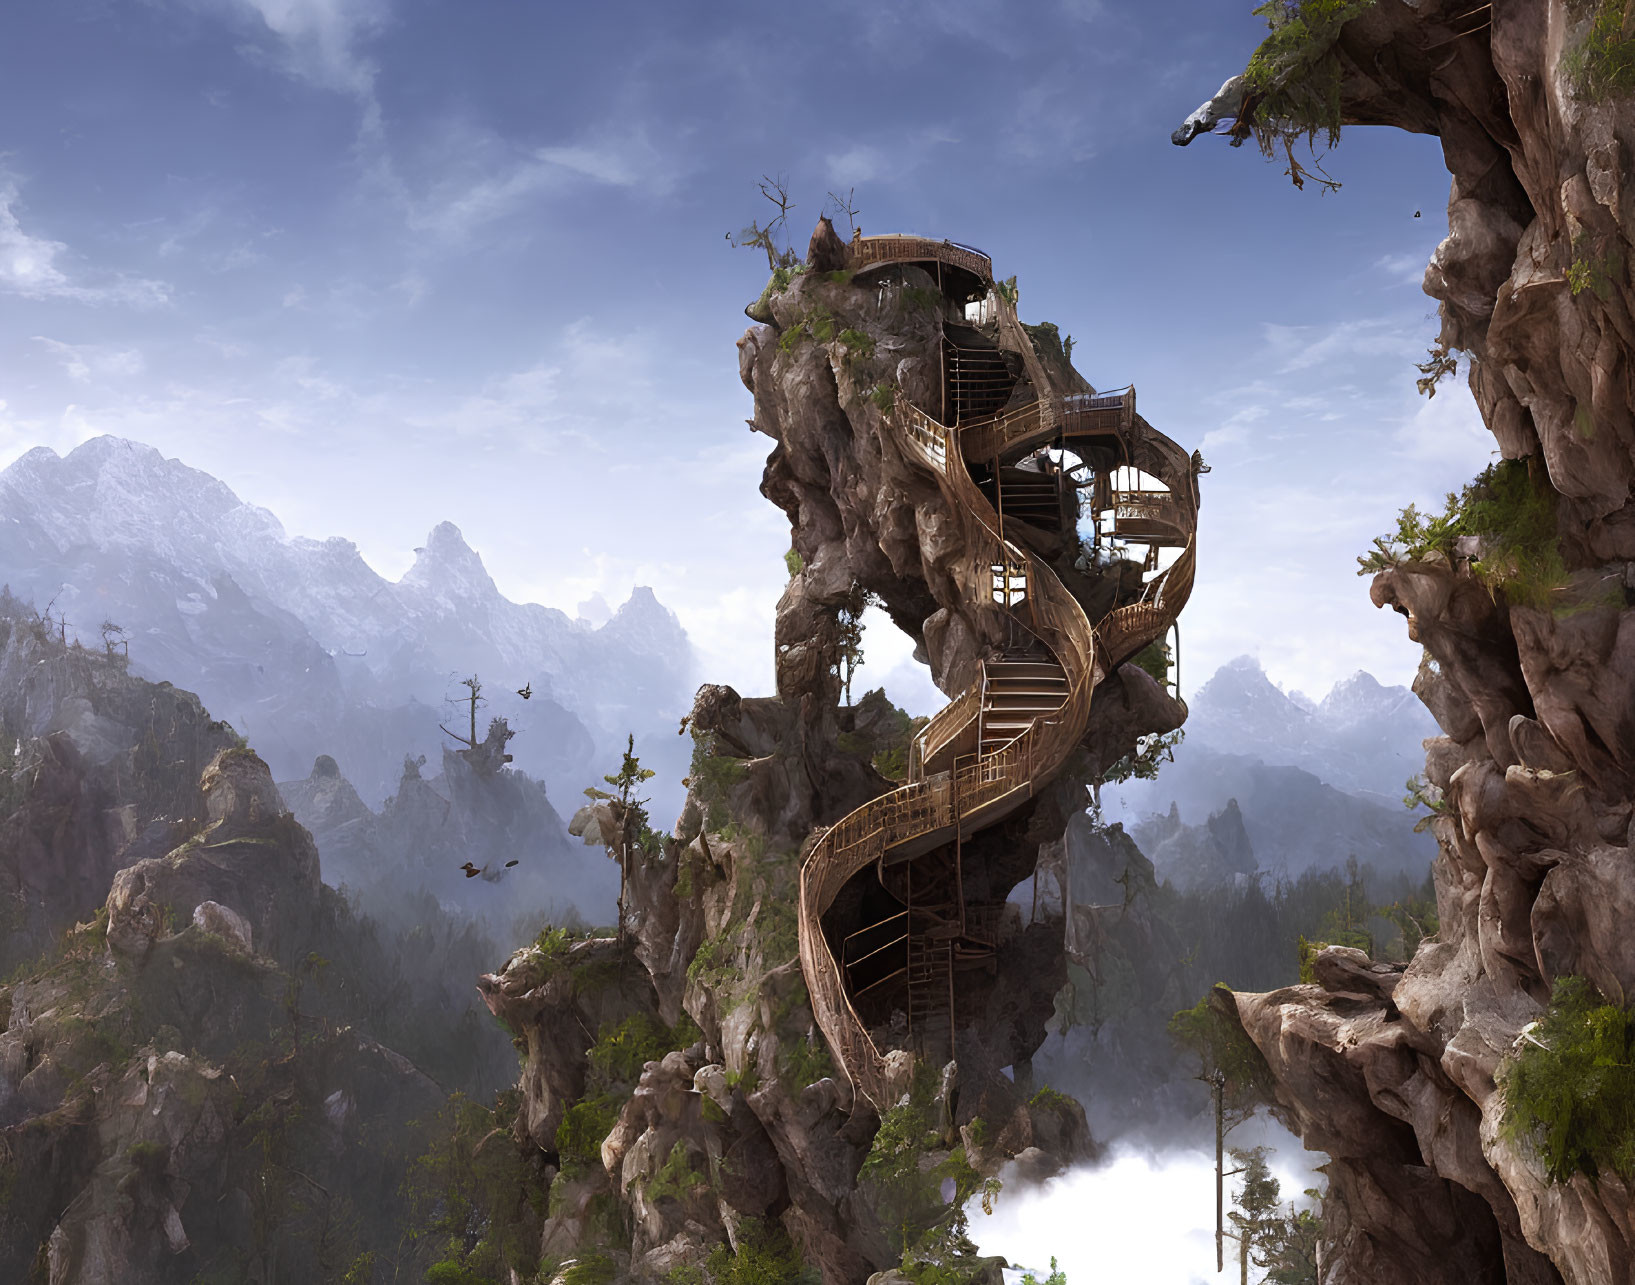 Fantasy mountain landscape with spiral staircase, floating rock, wooden platforms, clouds.